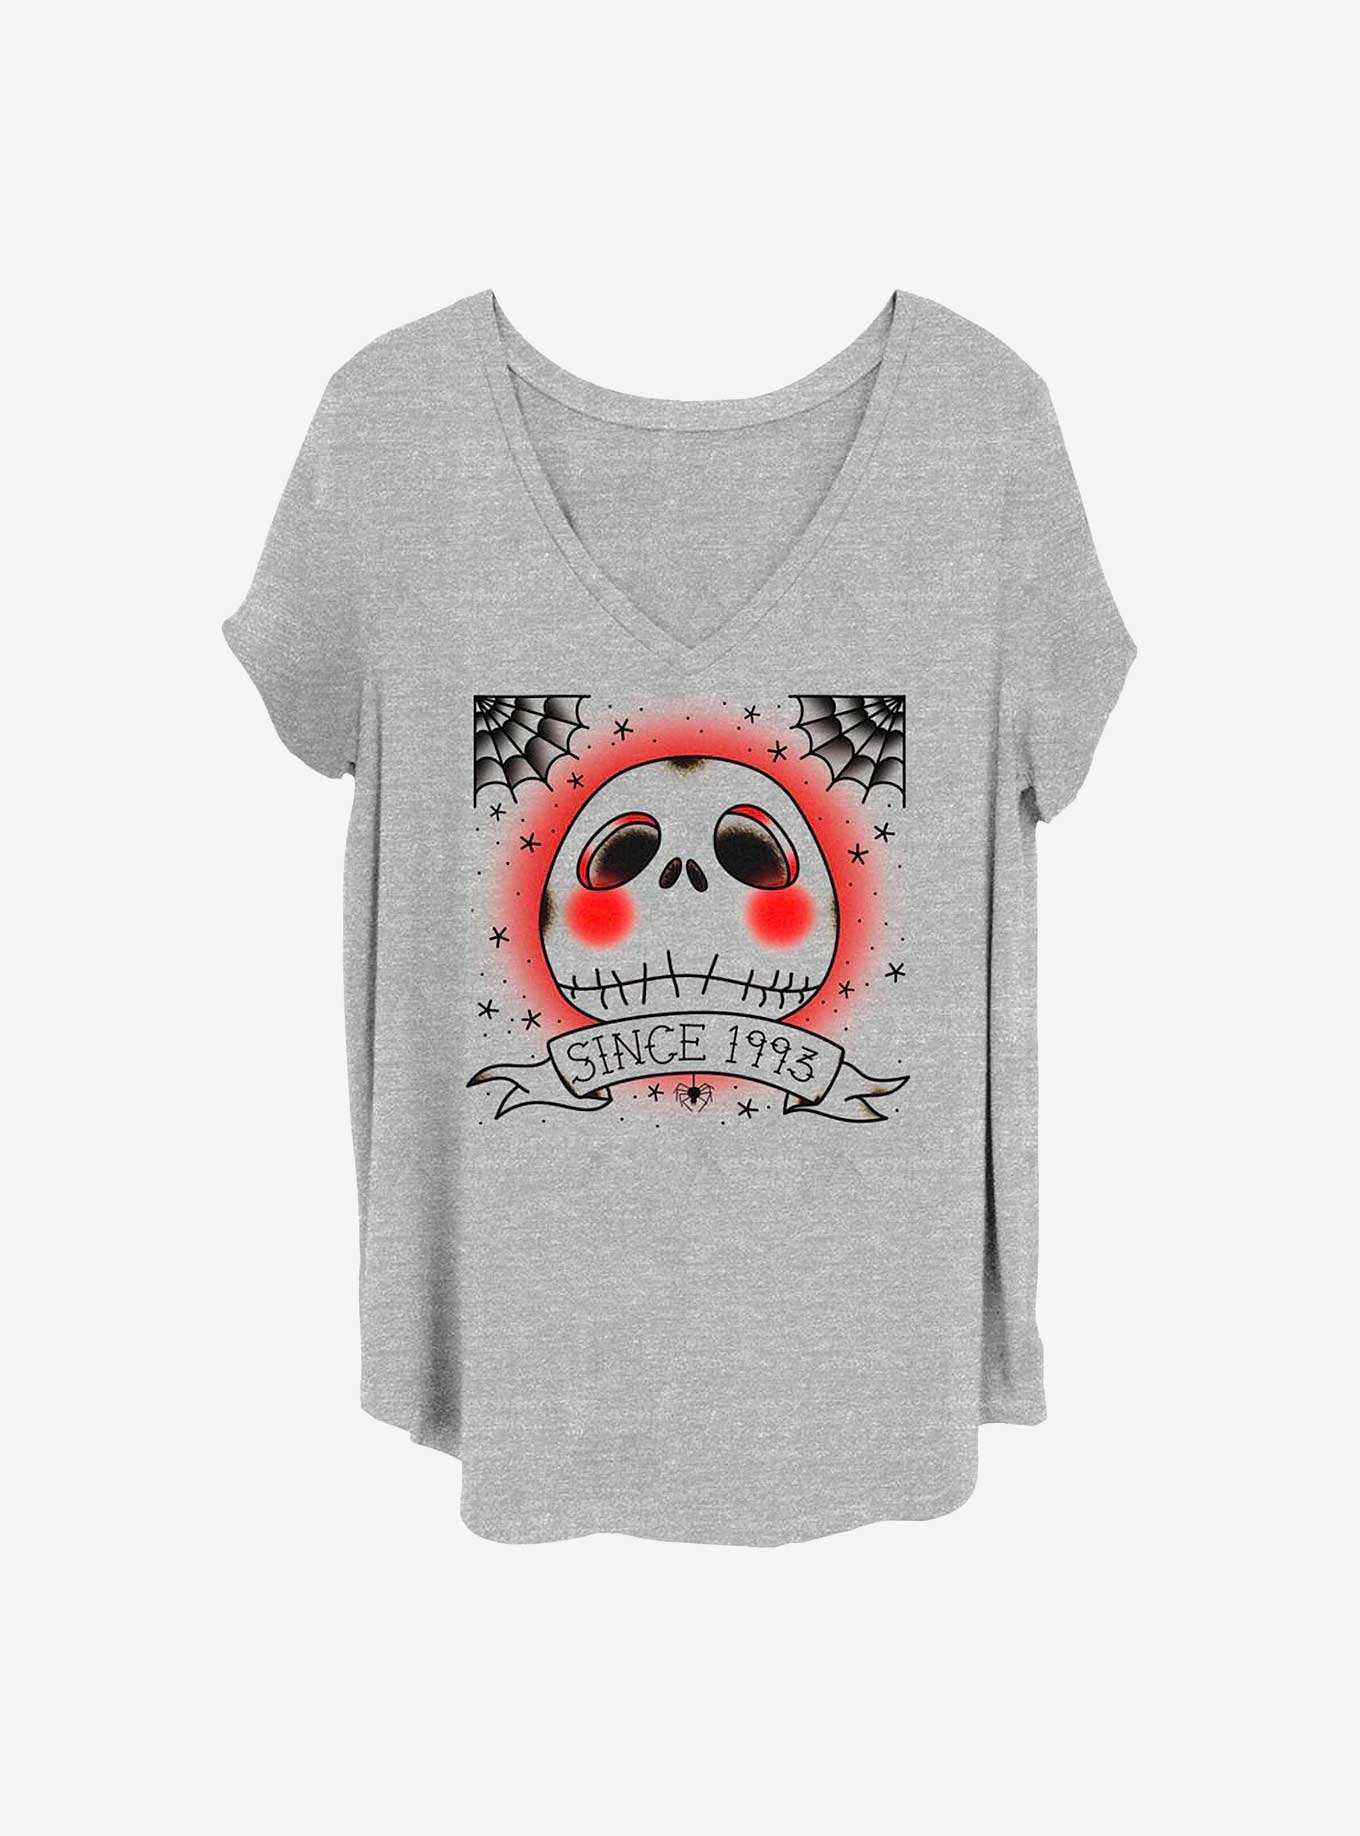 Disney The Nightmare Before Christmas Jack Since 1993 Girls T-Shirt Plus Size, , hi-res